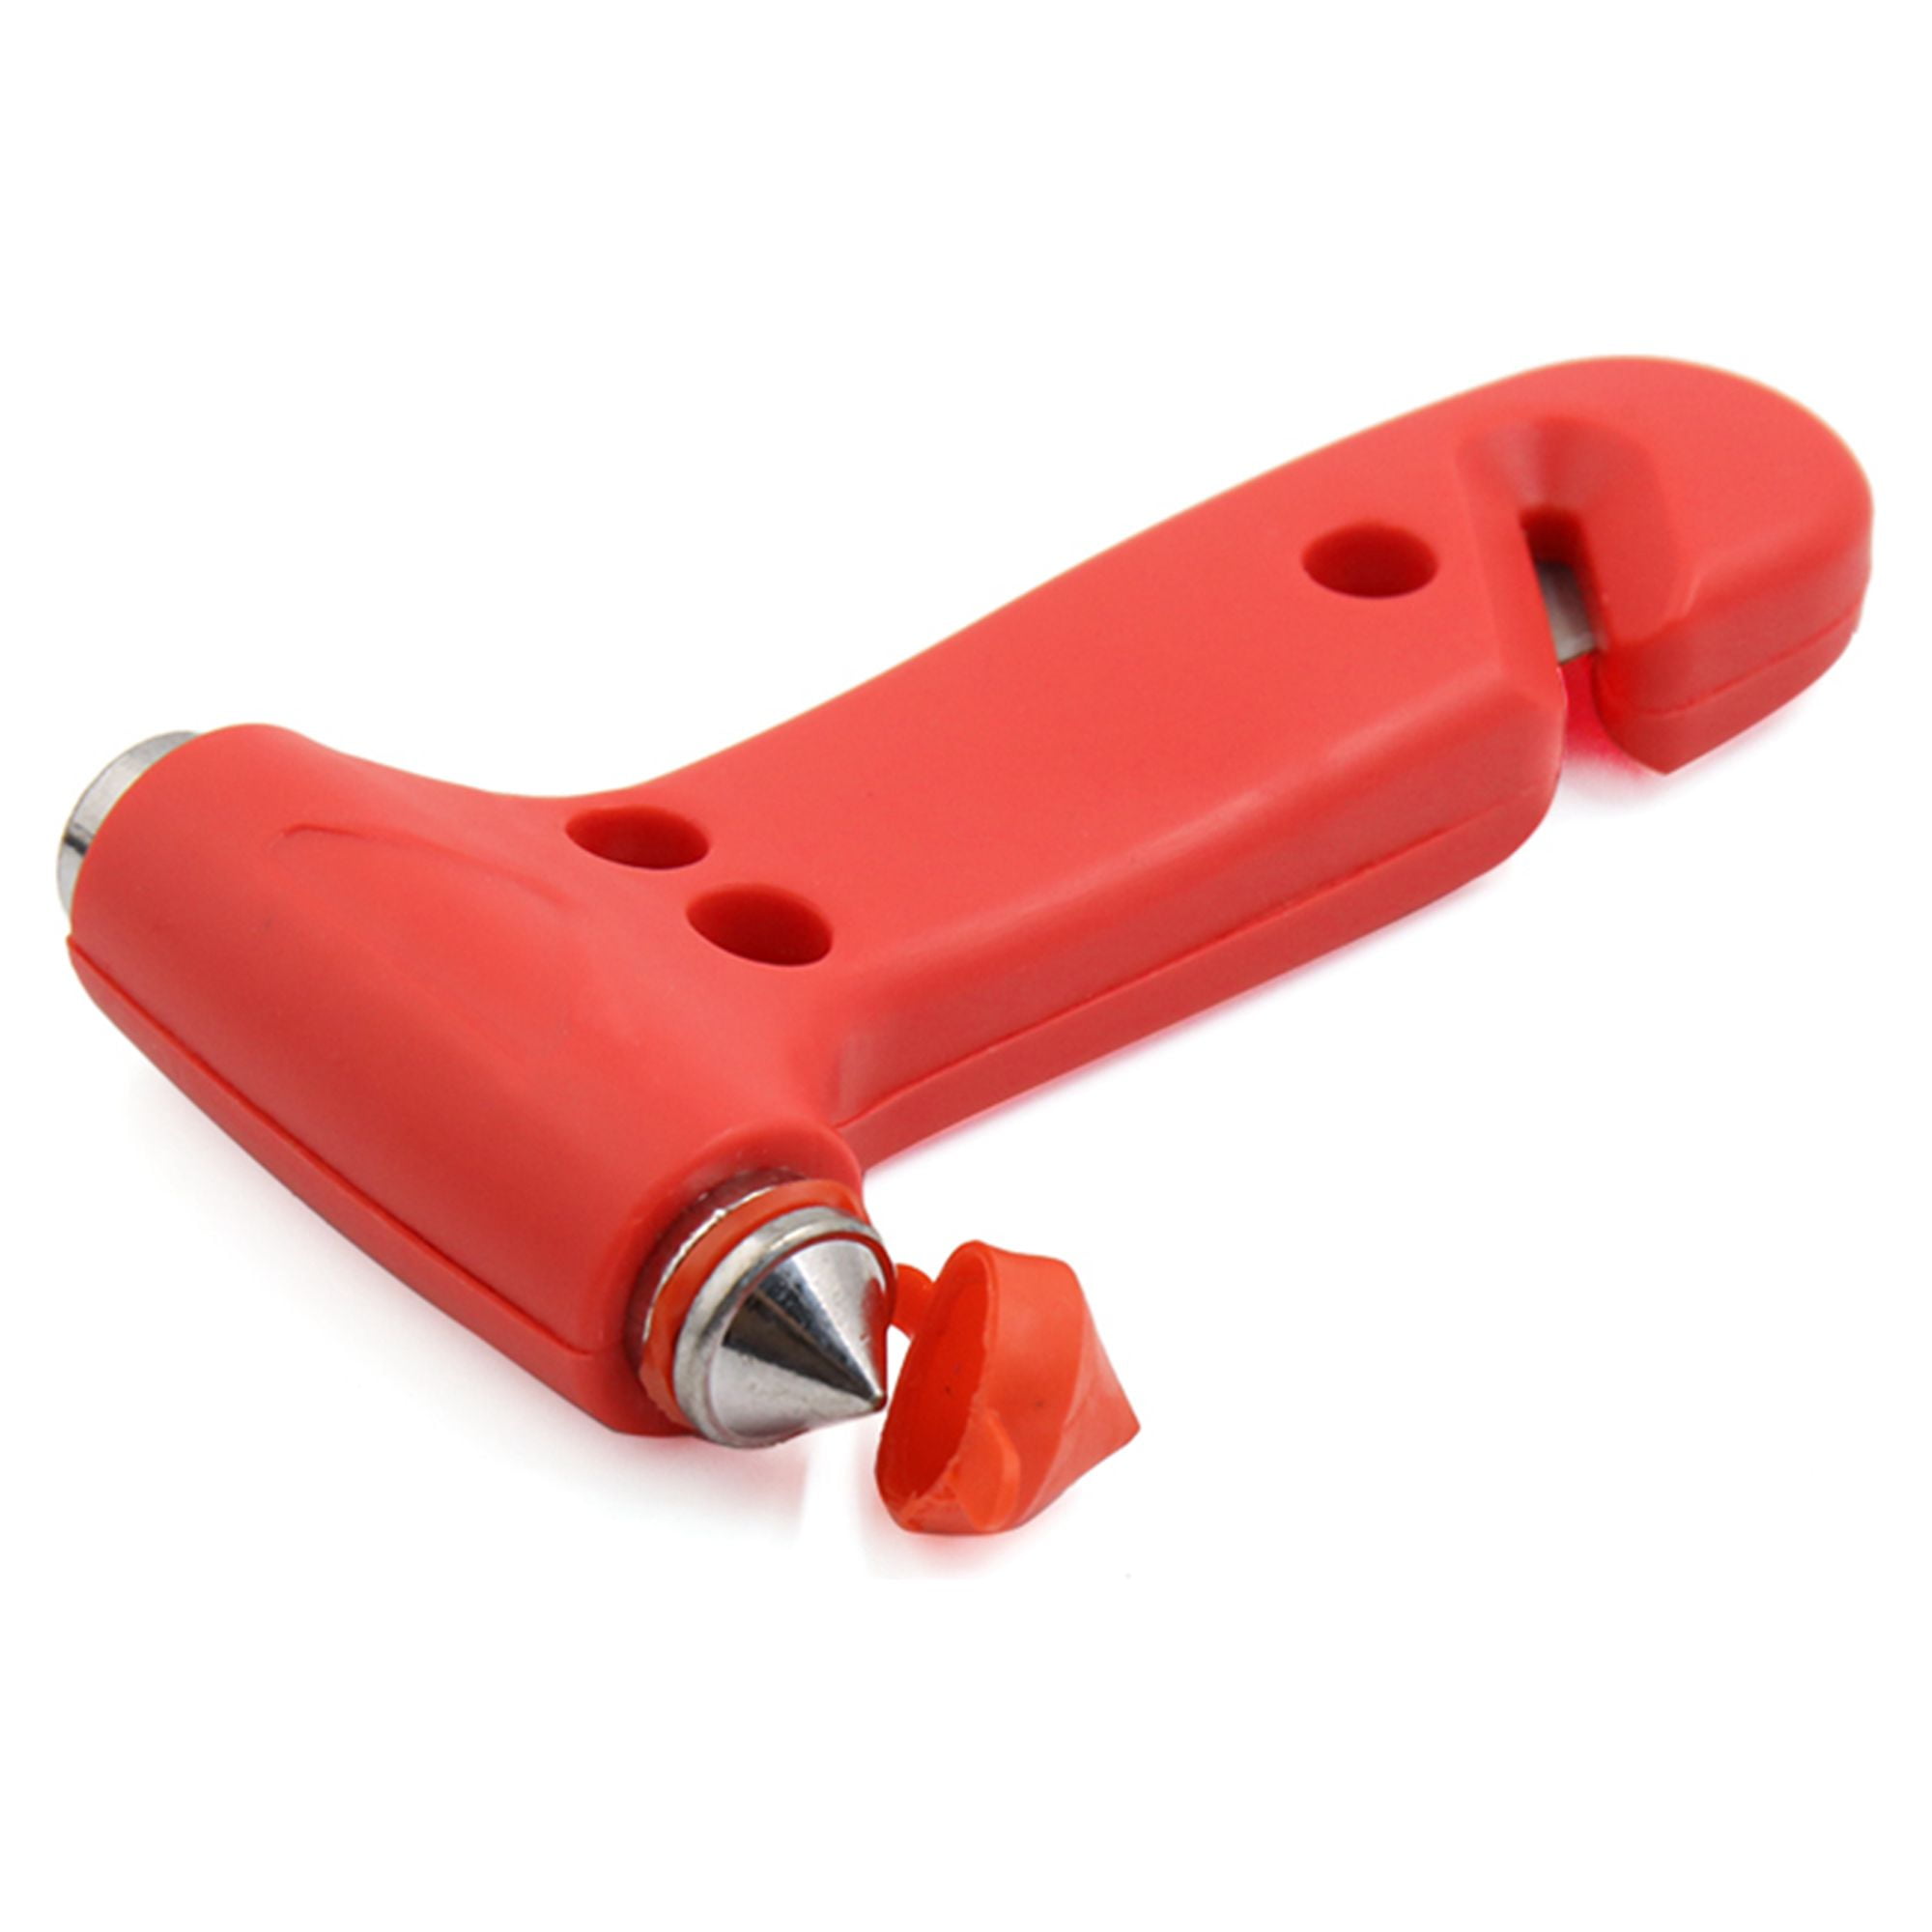  Hammerdex Glass Breaker, Car Safety Hammer Window Glass, Seat  Belt Cutter Under Water Land Emergency Escape Tool, for Every Auto Driver  Rescue Tool Car Escape Safe Hammer. (Red) : Home 